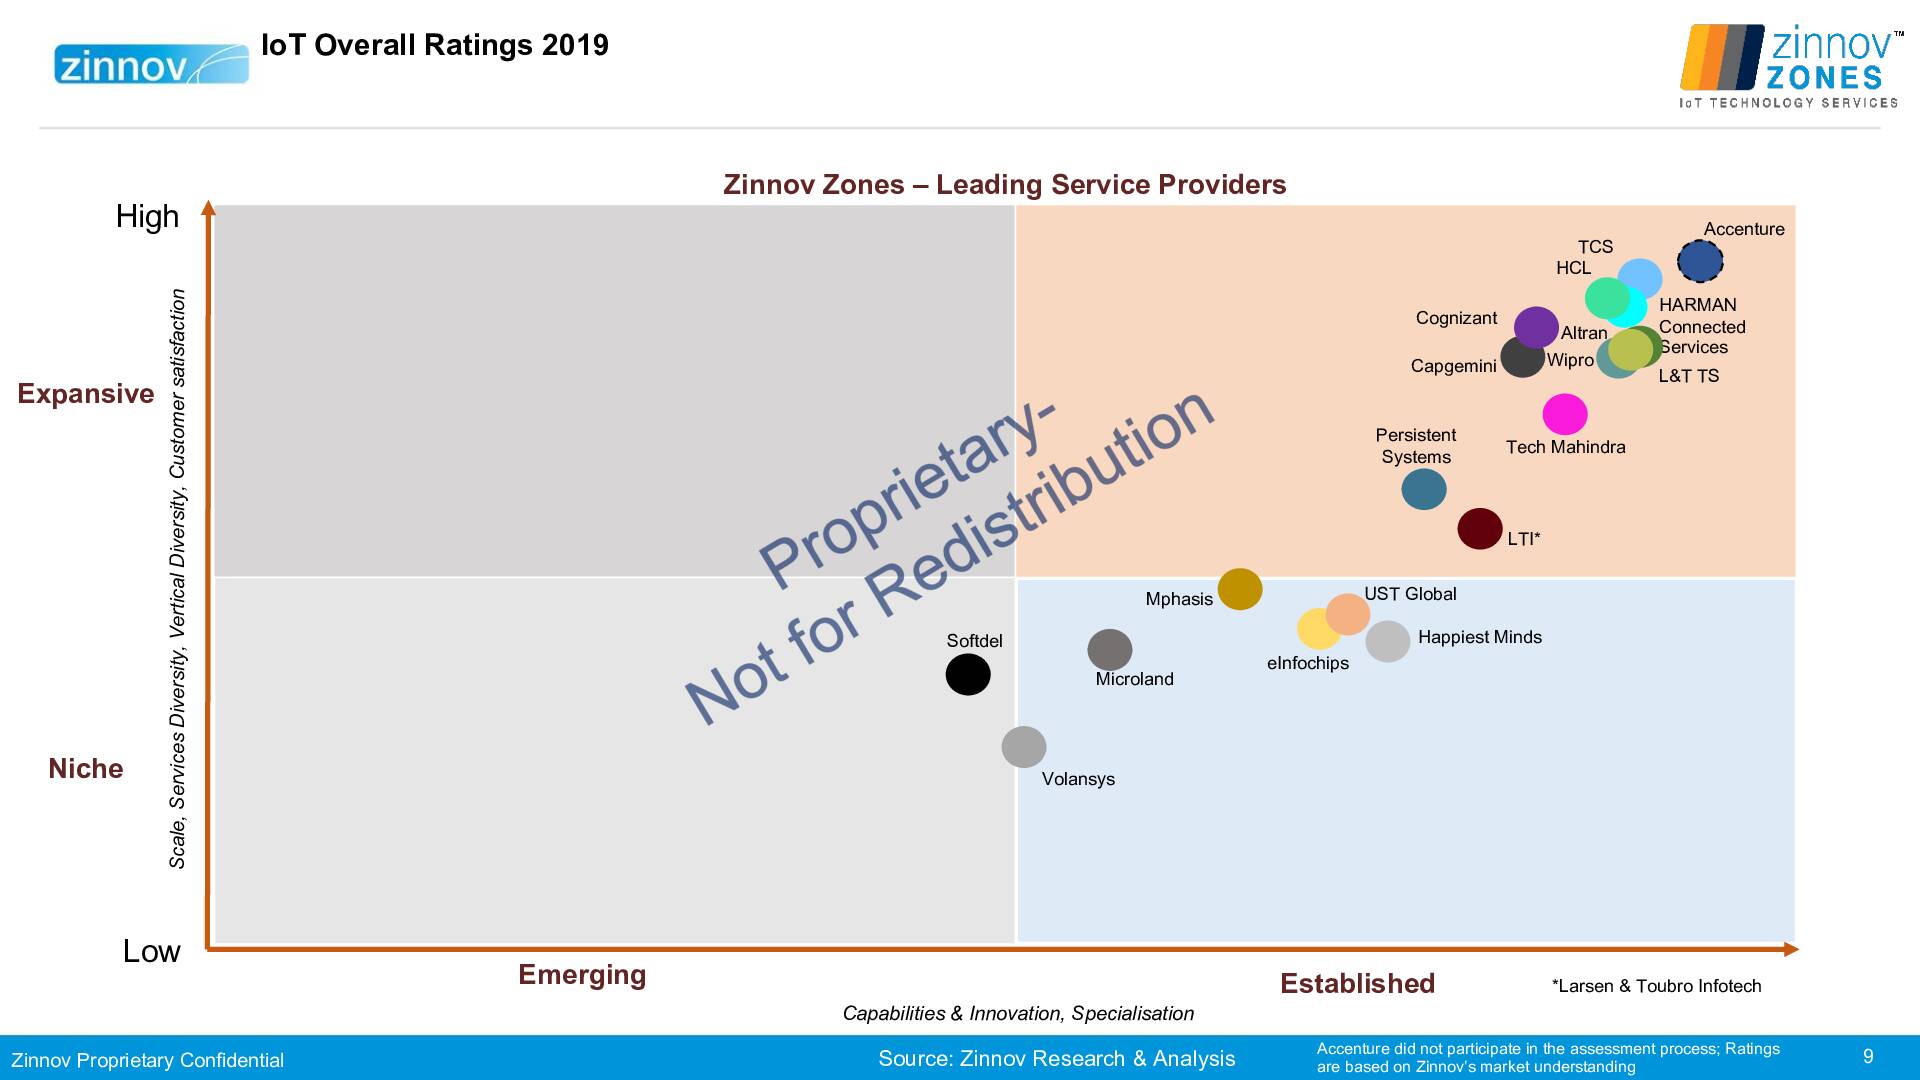 Zinnov Zones Iot Technology Services 2019 Ratings9